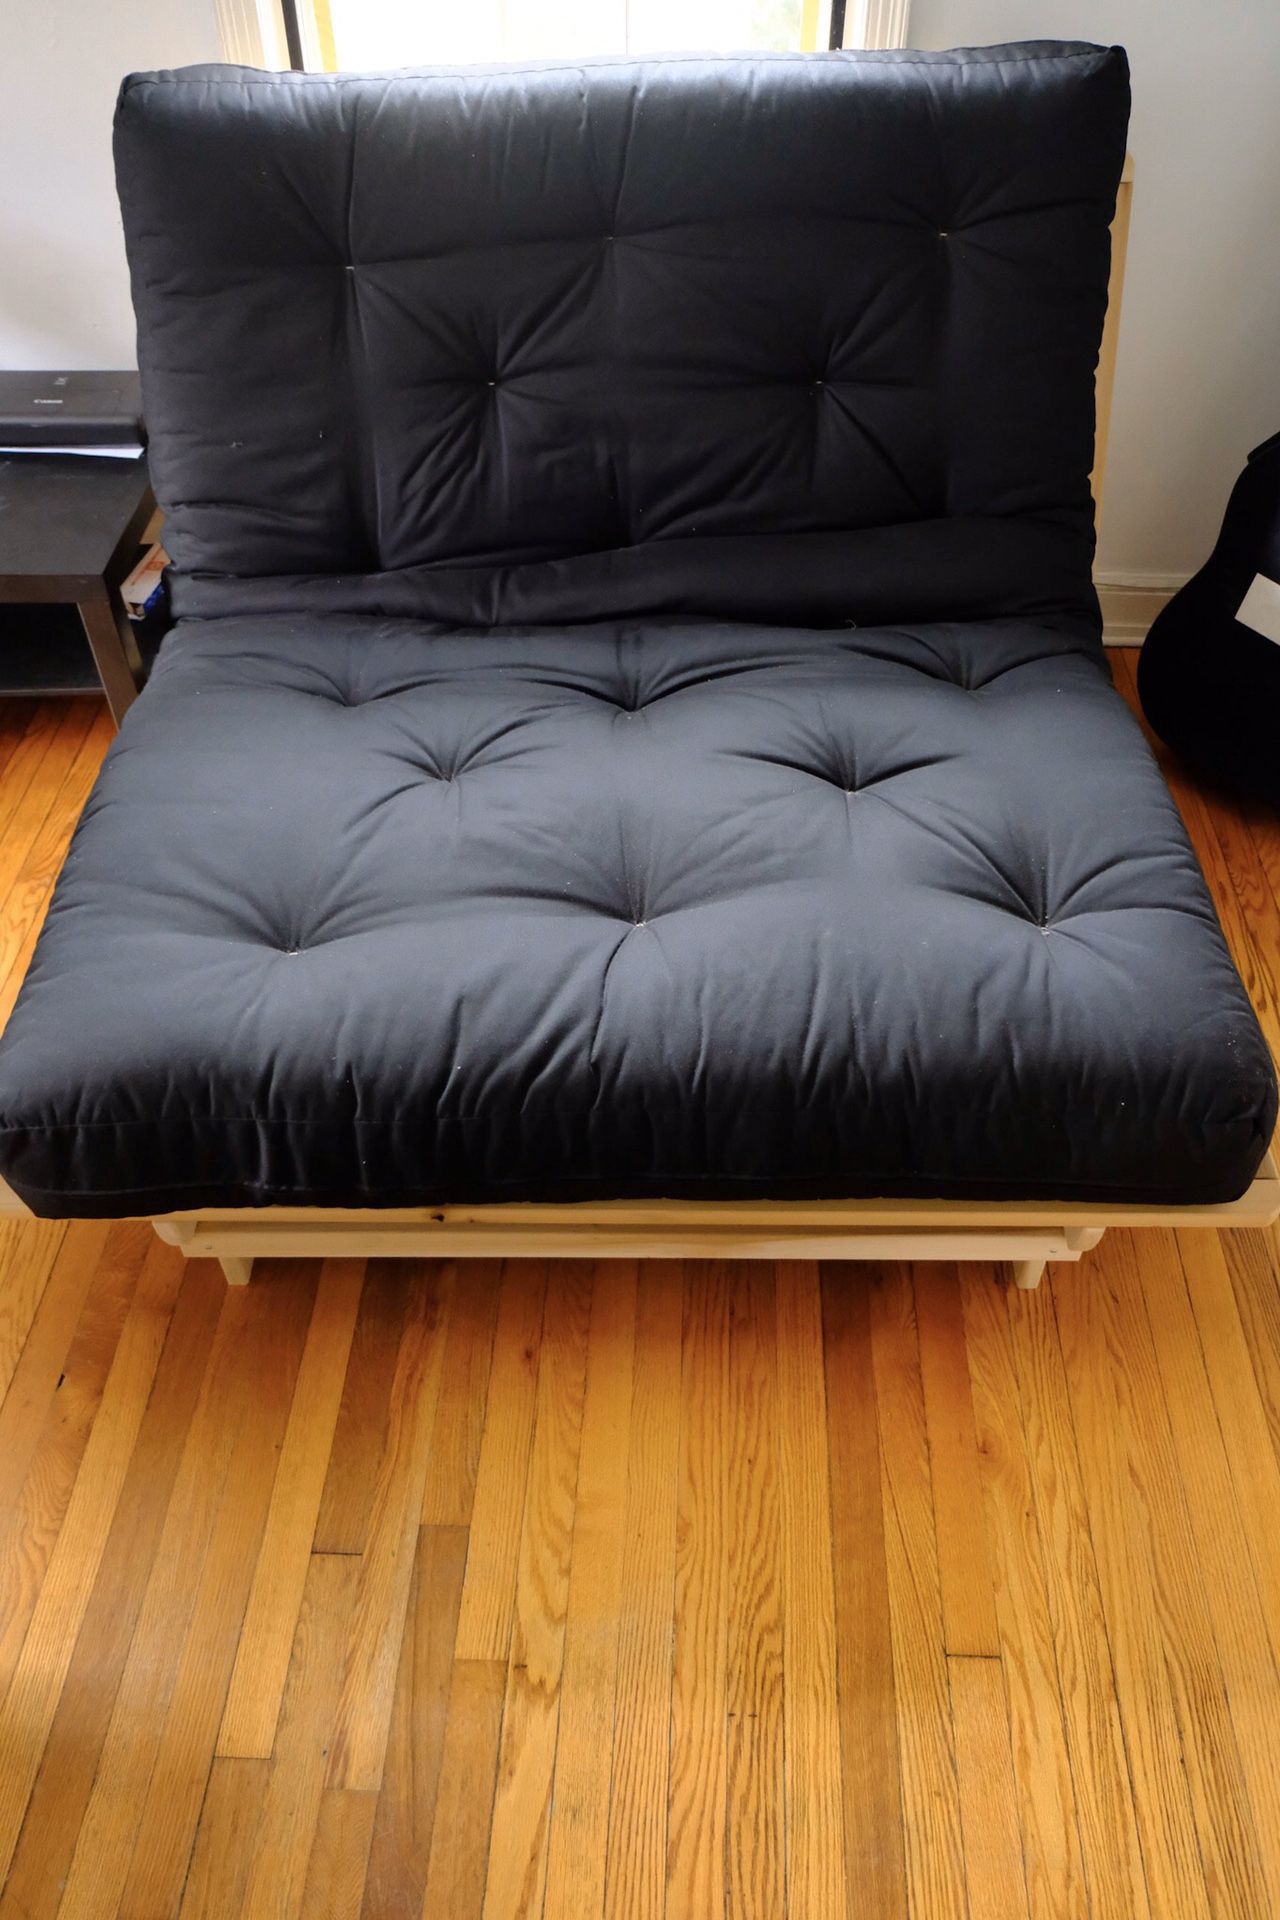 NOW FREE Futon with memory foam mattress (barely used)